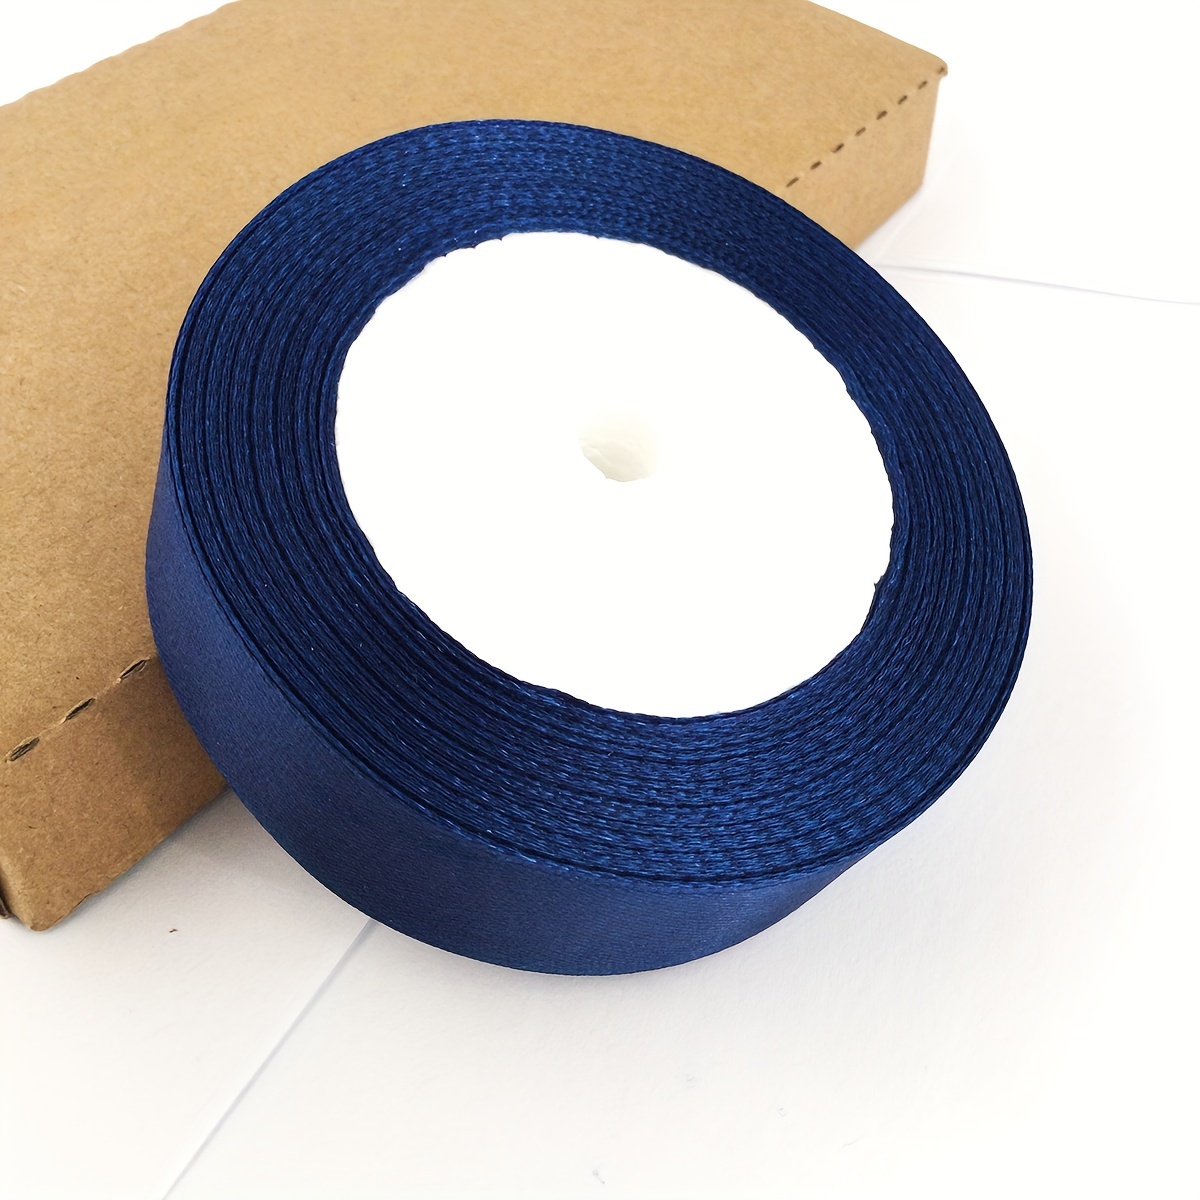 Navy Blue Satin Ribbon 1 Inch x 25 Yards, Solid Color Polyester Fabric  Ribbon for Gift Wrapping, Crafts, Bows Making, Wreaths, Sewing Projects,  Baby